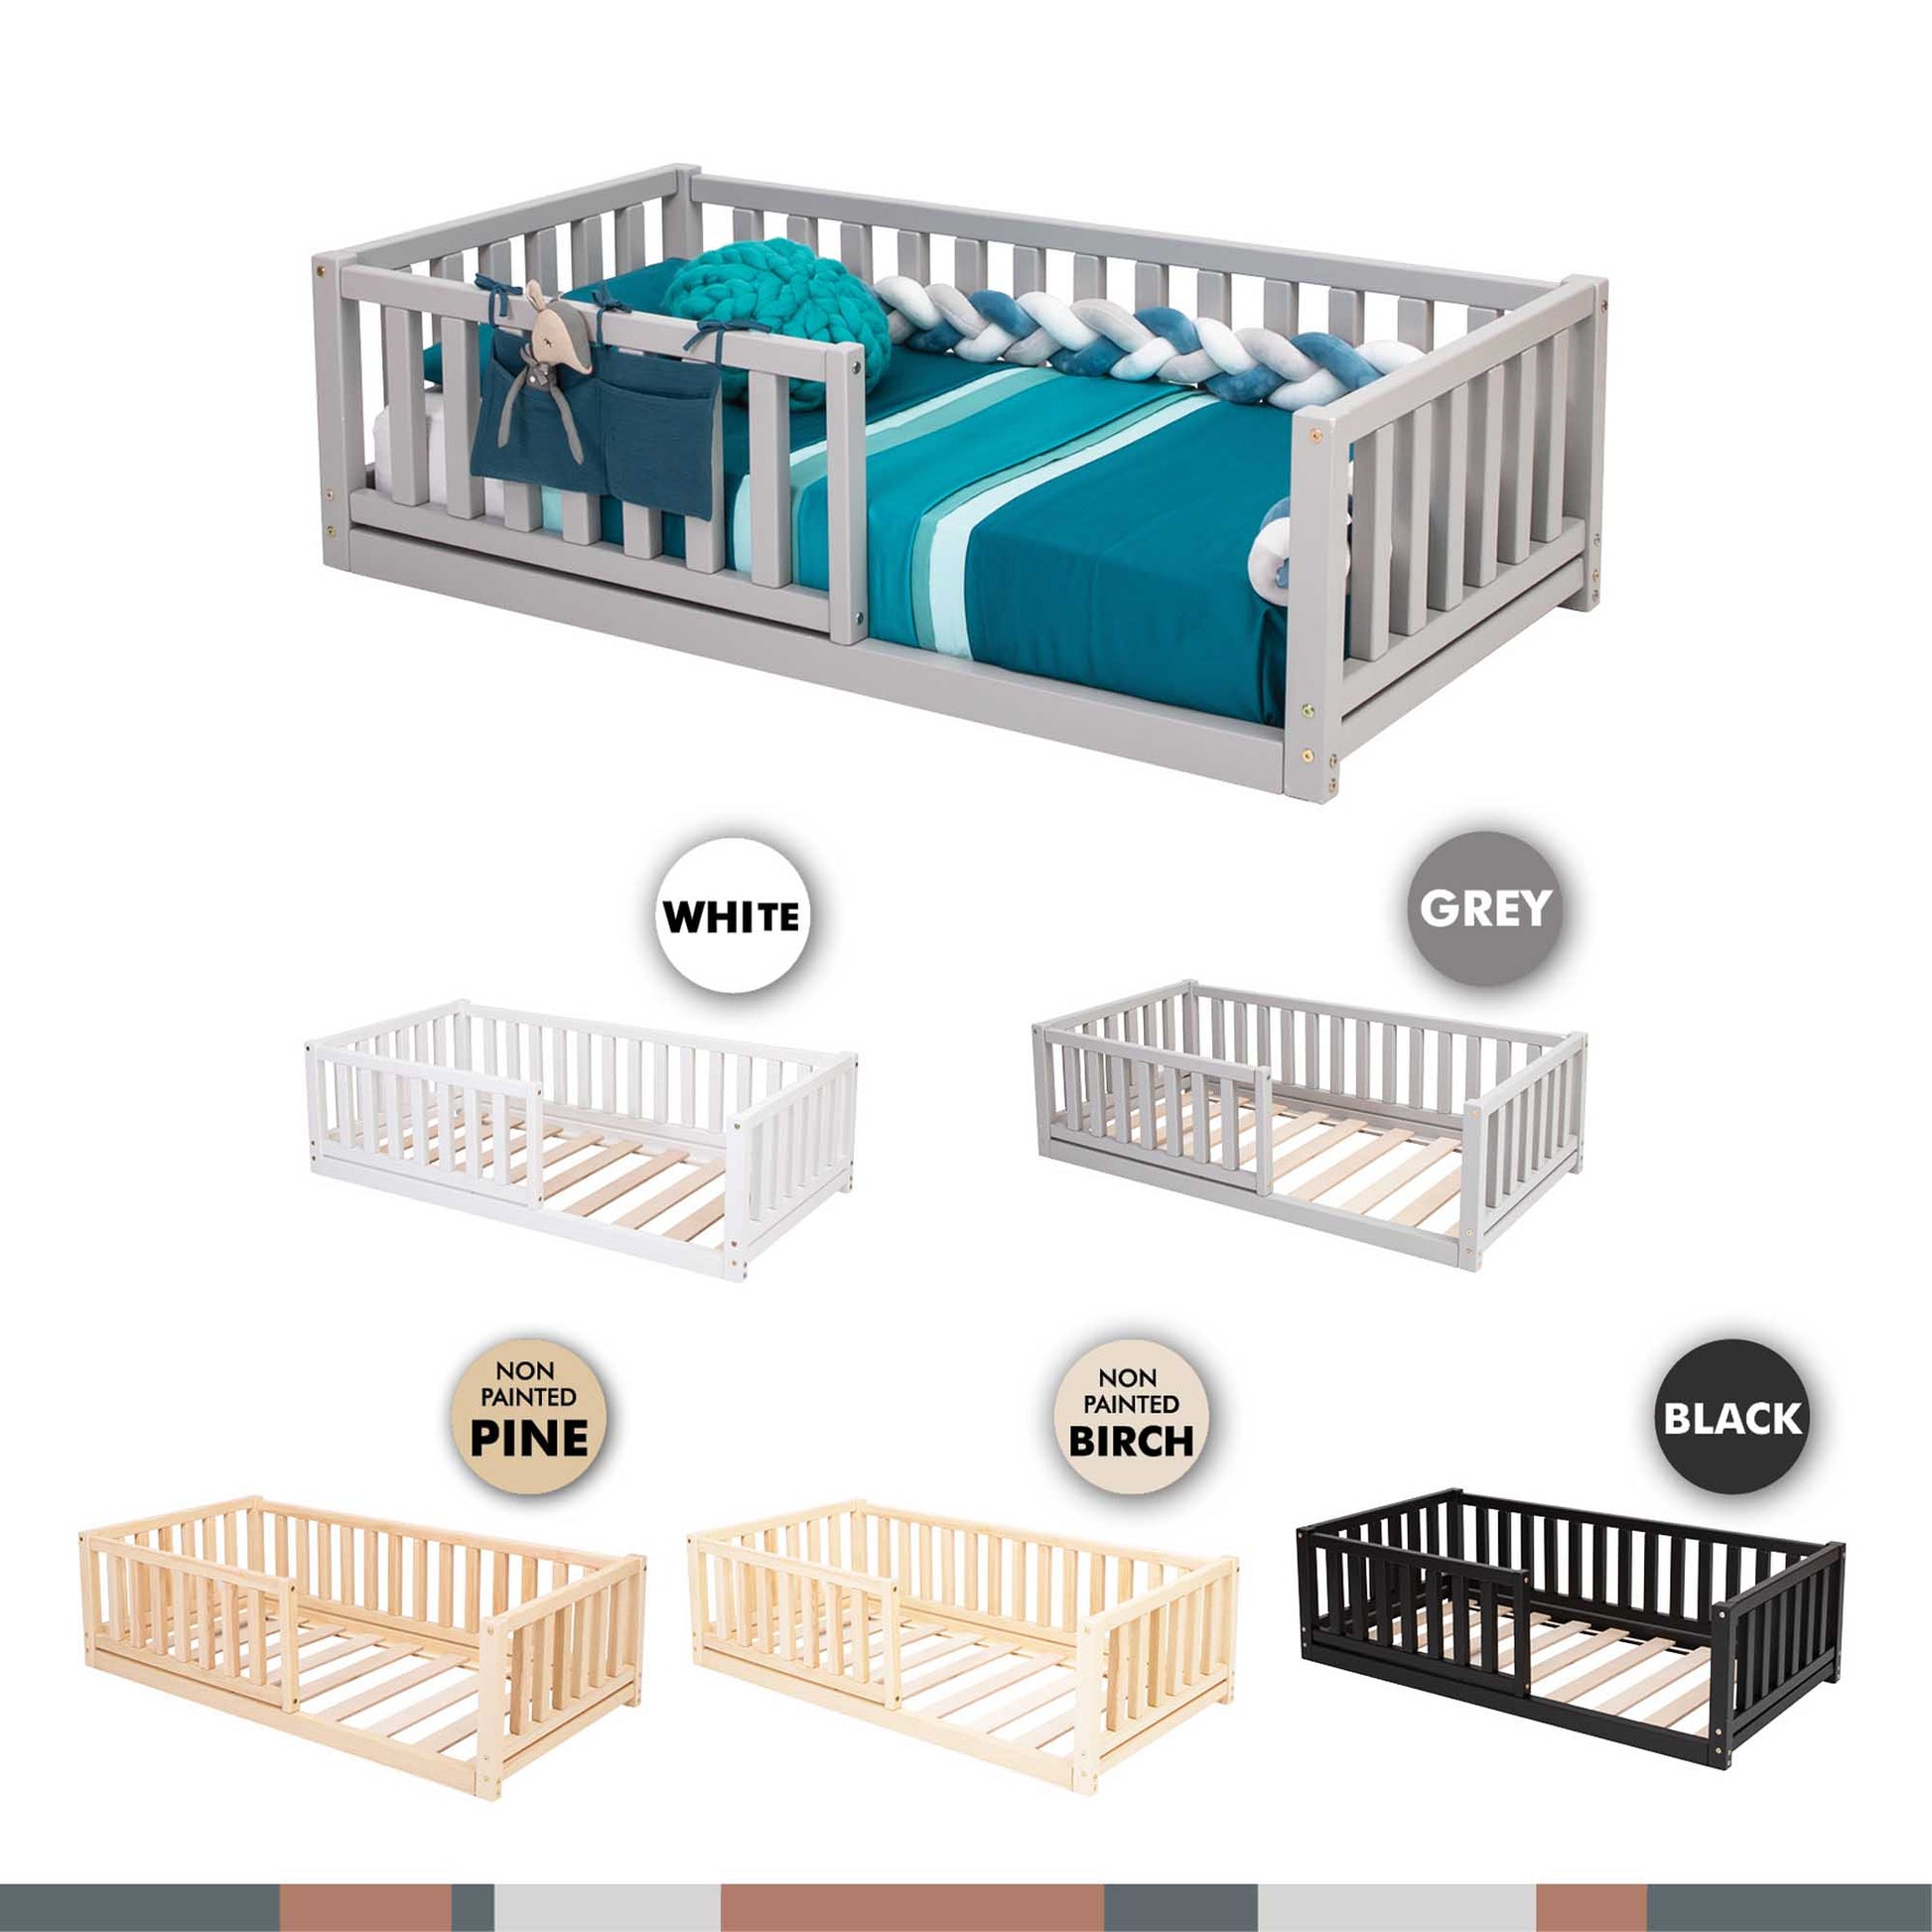 Montessori kids' bed with a fence from Sweet Home From Wood, in a variety of colors and styles, offering independent sleeping and security for children.